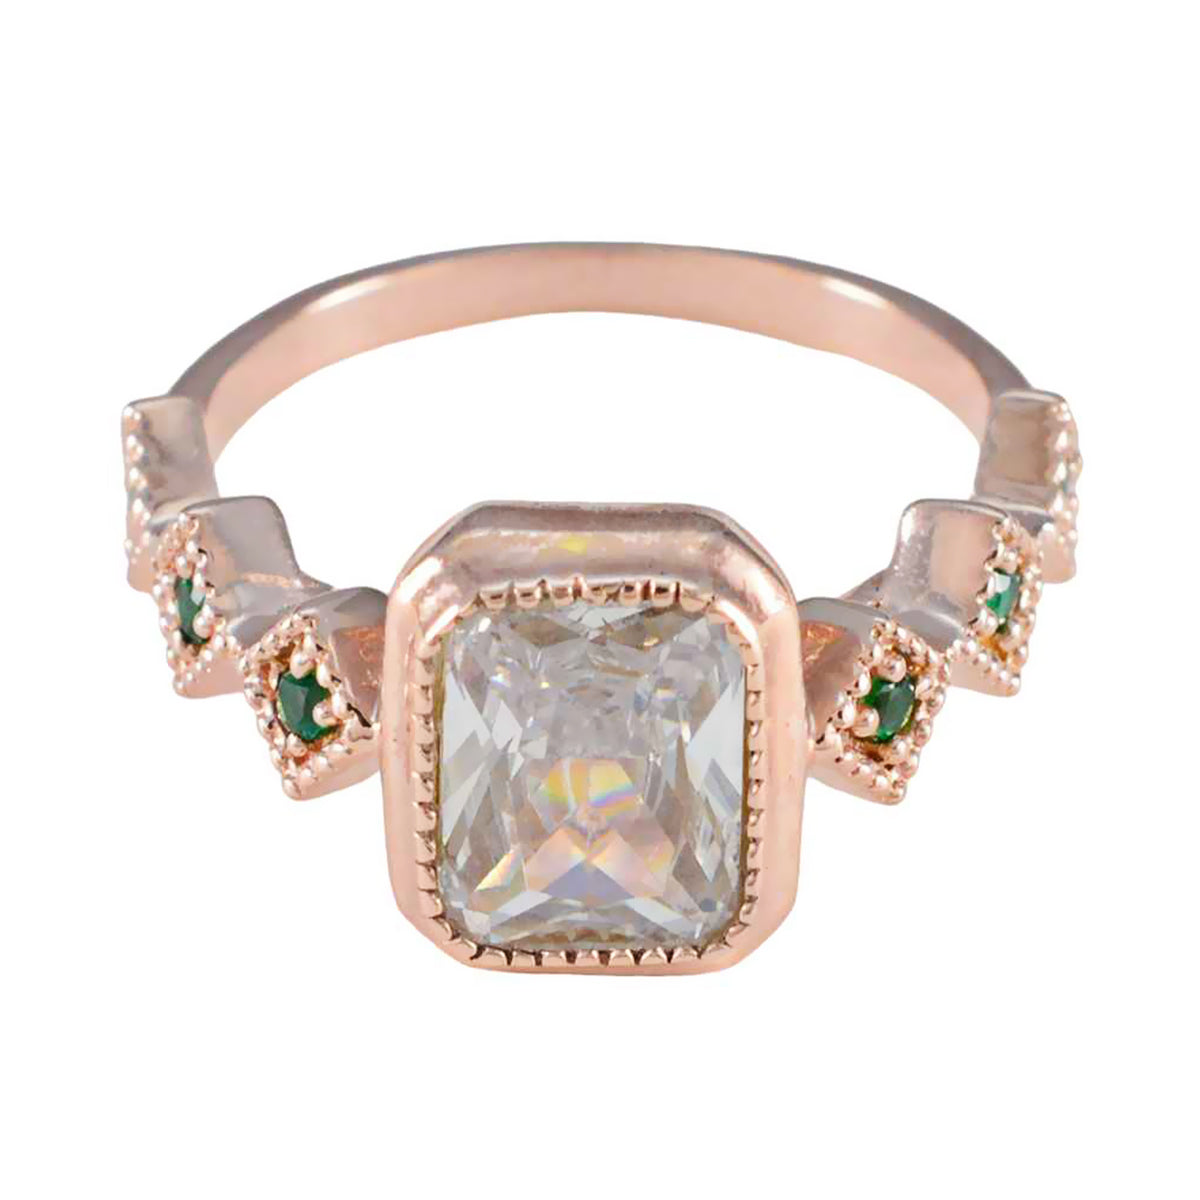 Riyo Gemstone Silver Ring With Rose Gold Plating Emerald CZ Stone Octagon Shape Bezel Setting  Jewelry Cocktail Ring